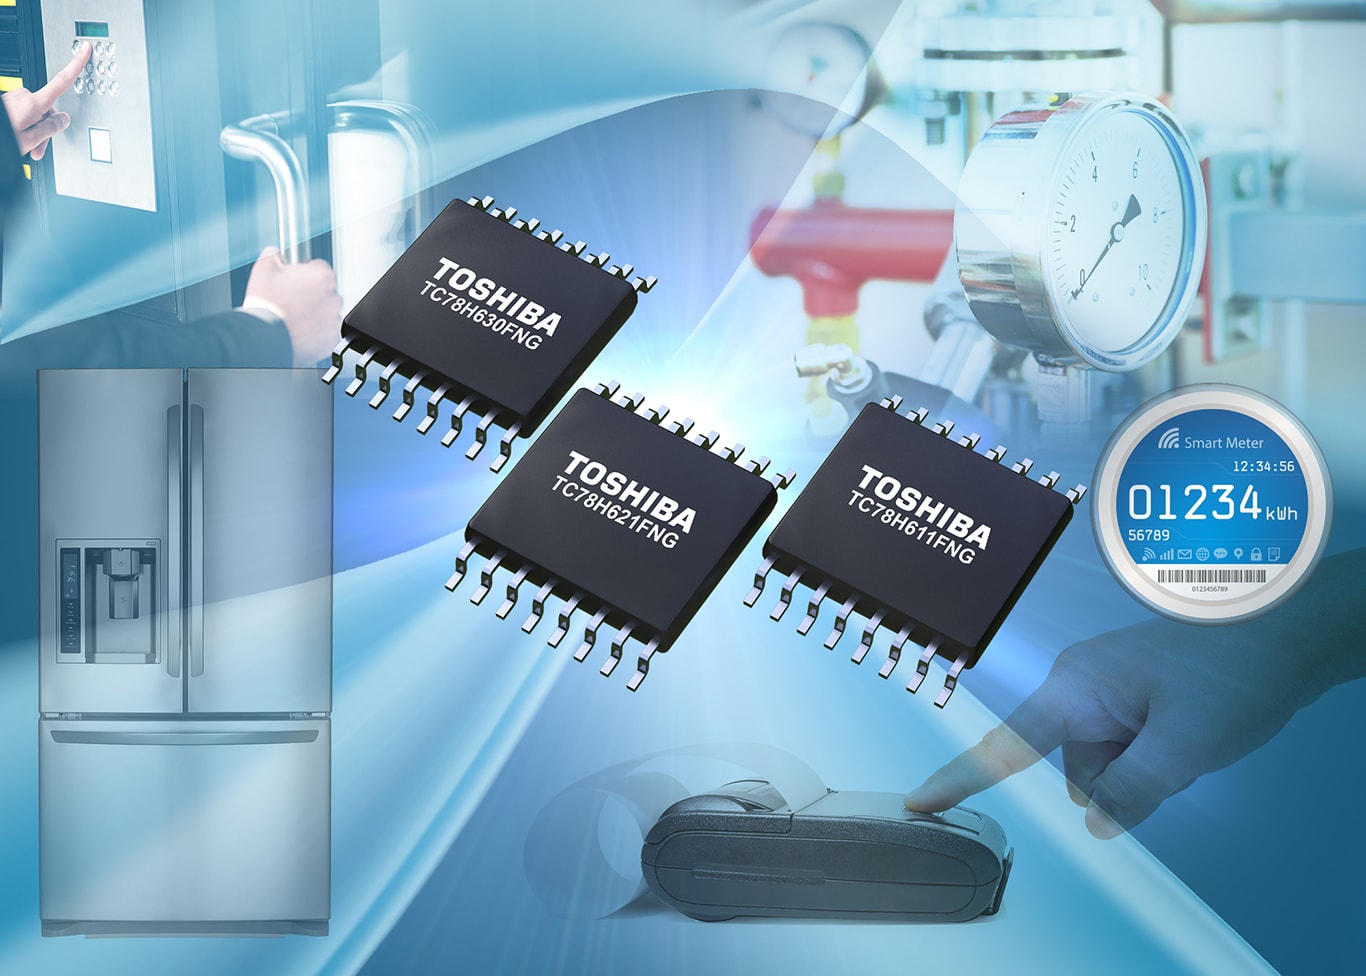 Toshiba Launches H-Bridge Driver ICs for Low-Voltage 2.5V Drive